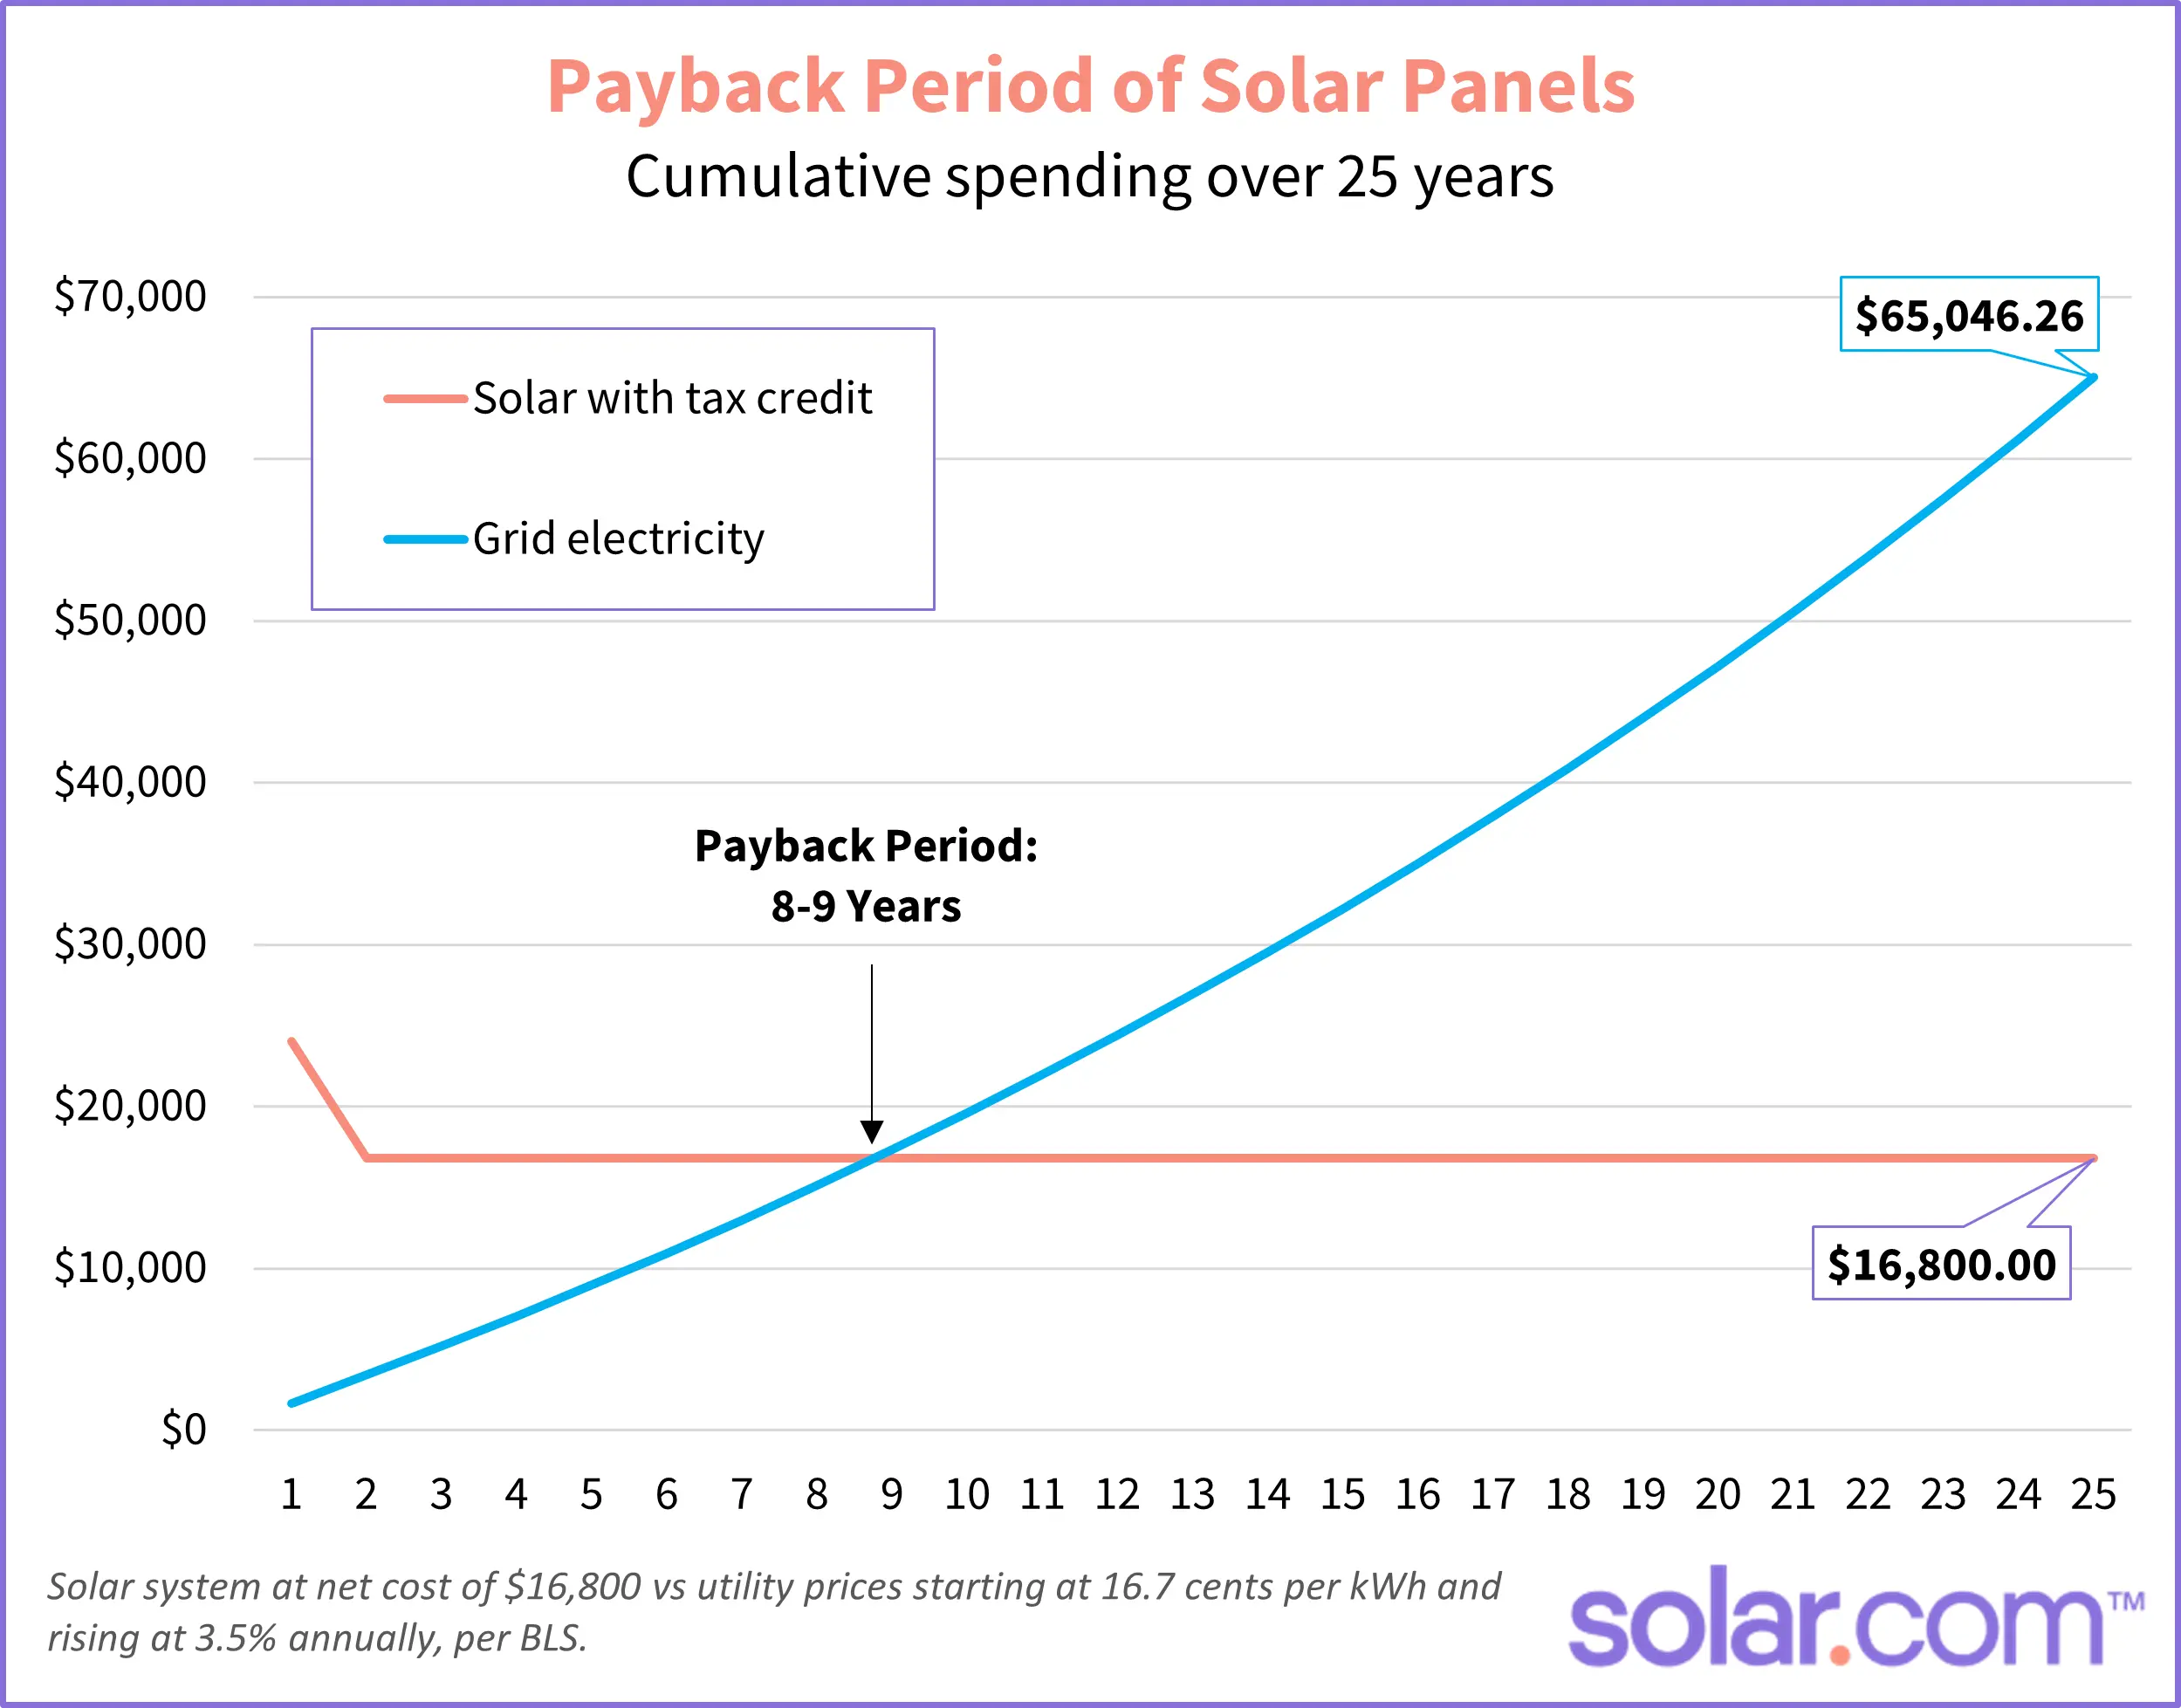 energy payback time for solar panels - How long does it take to get your money back on a solar system